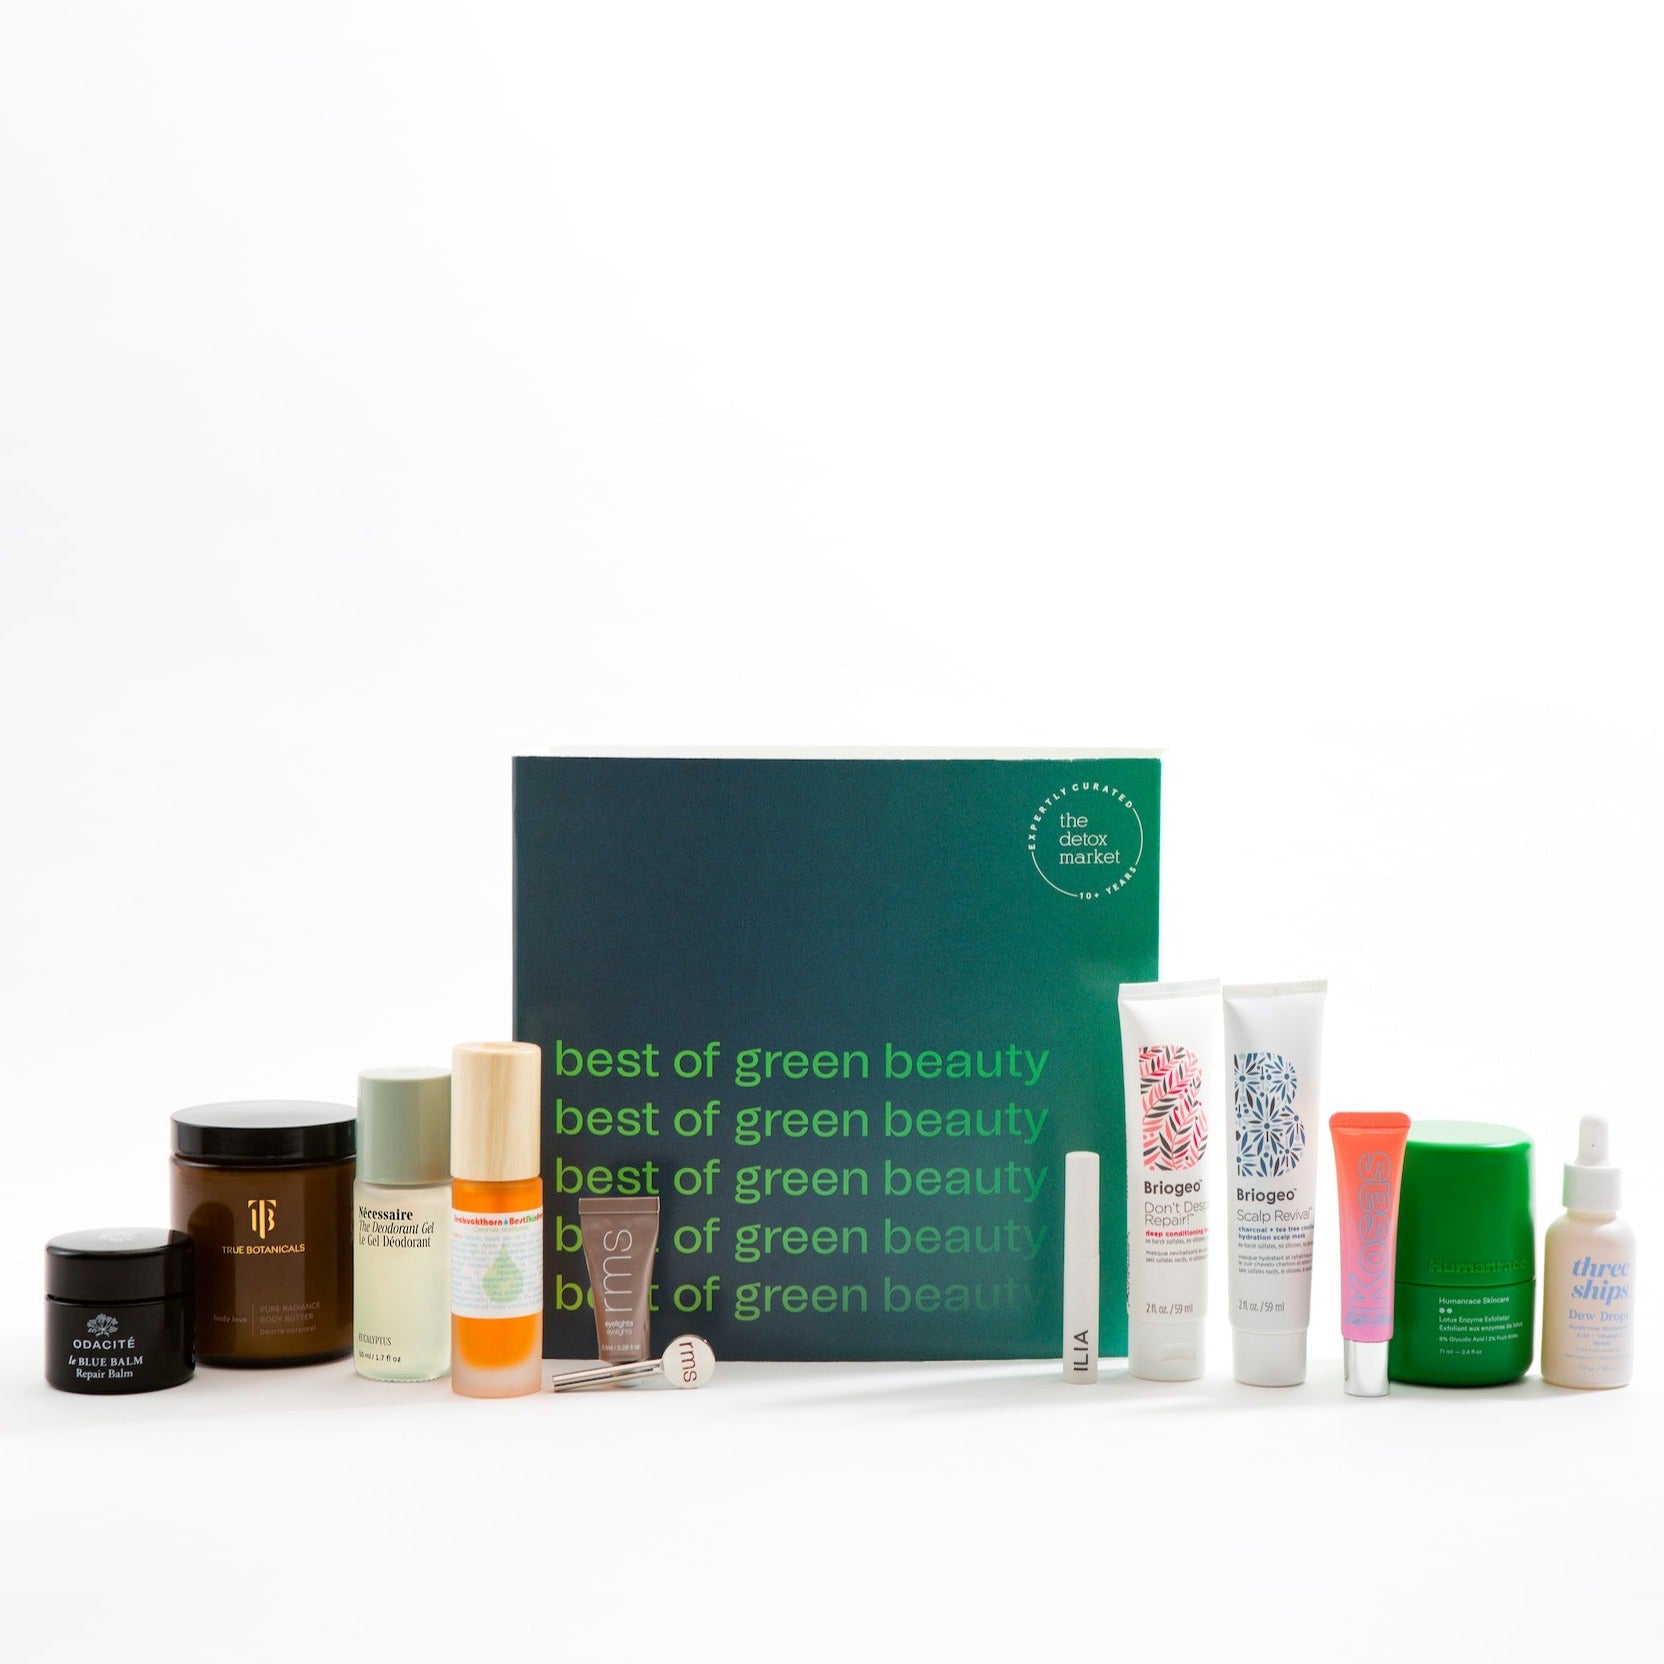 Clean beauty holiday gift guide - Detox Market best of green beauty box 2022